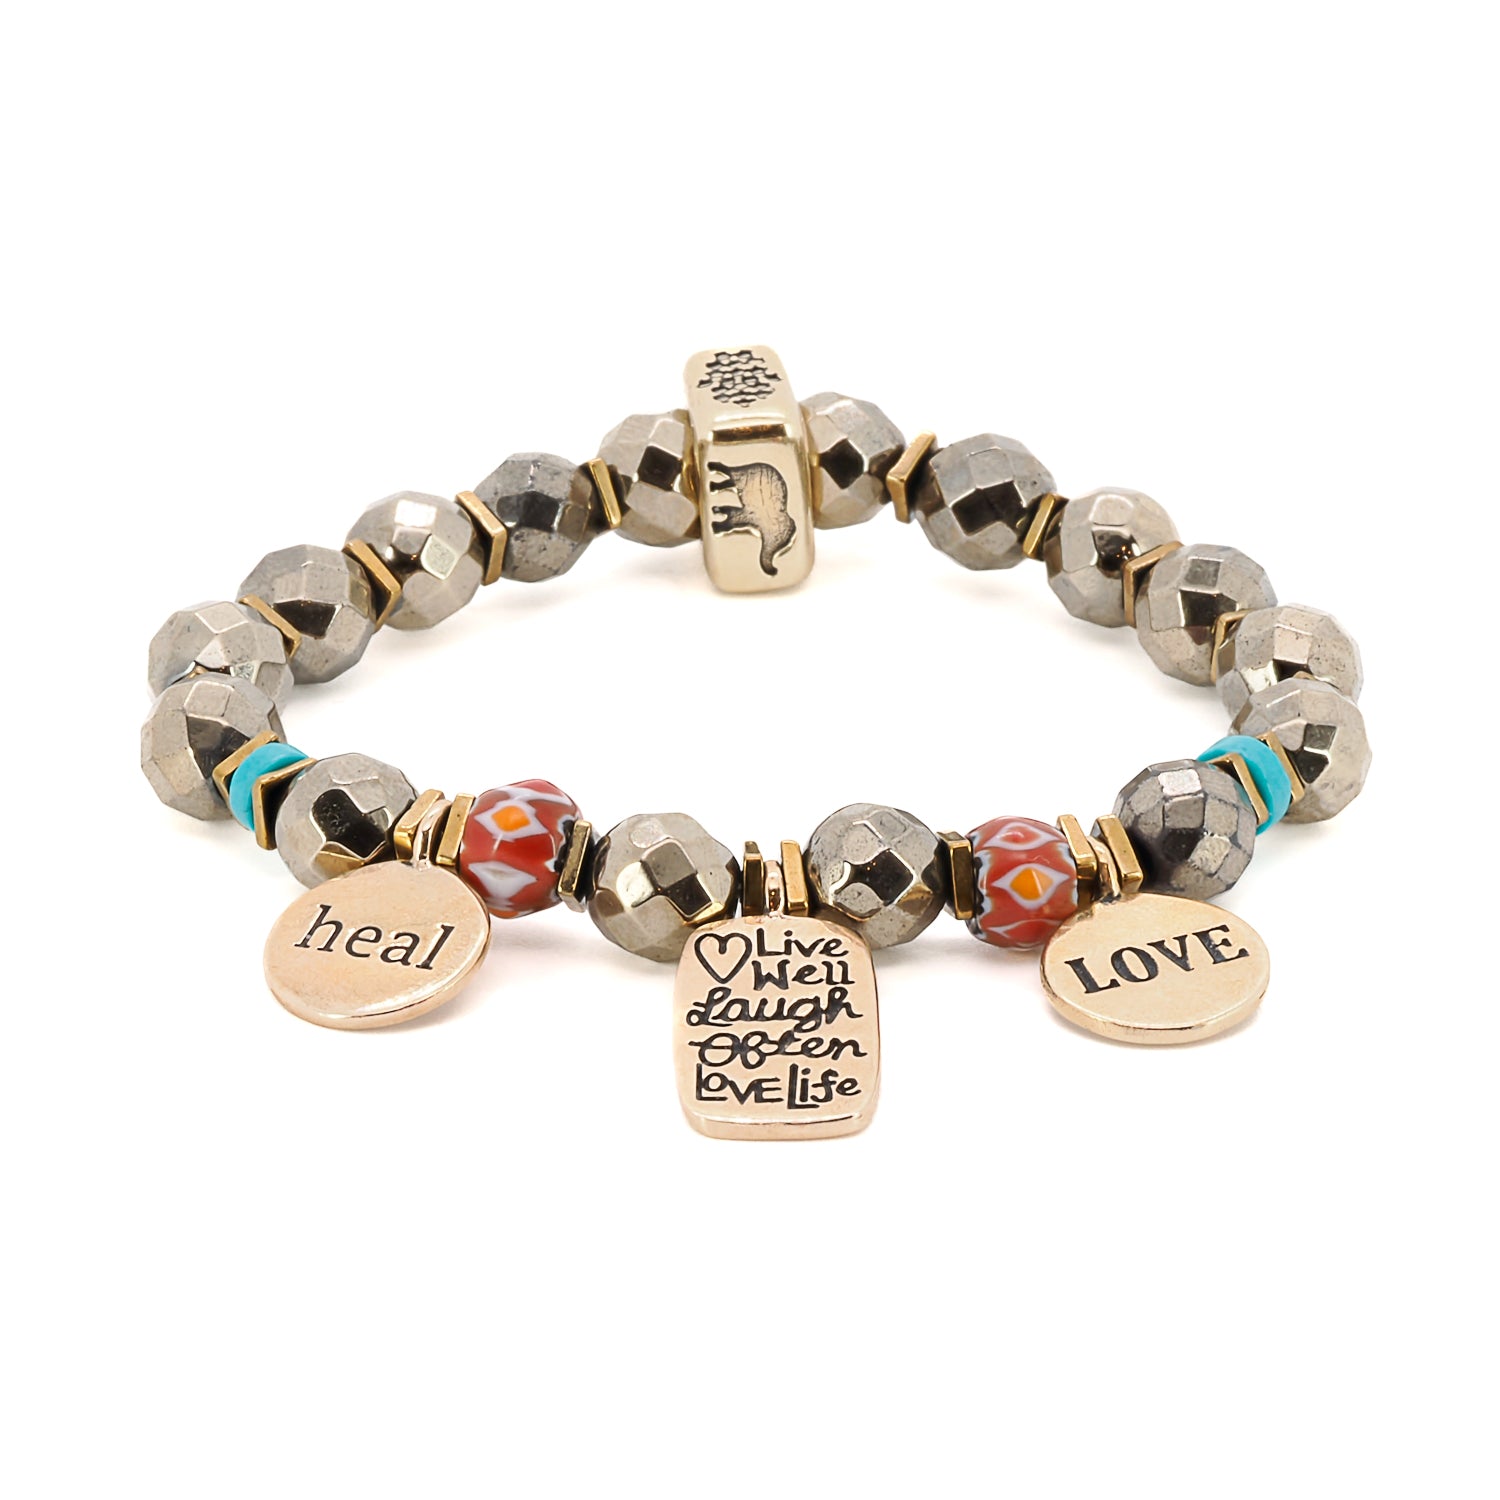 Embrace the positive message of the "Love Your Life" Bracelet, featuring gold hematite beads and meaningful bronze charms.